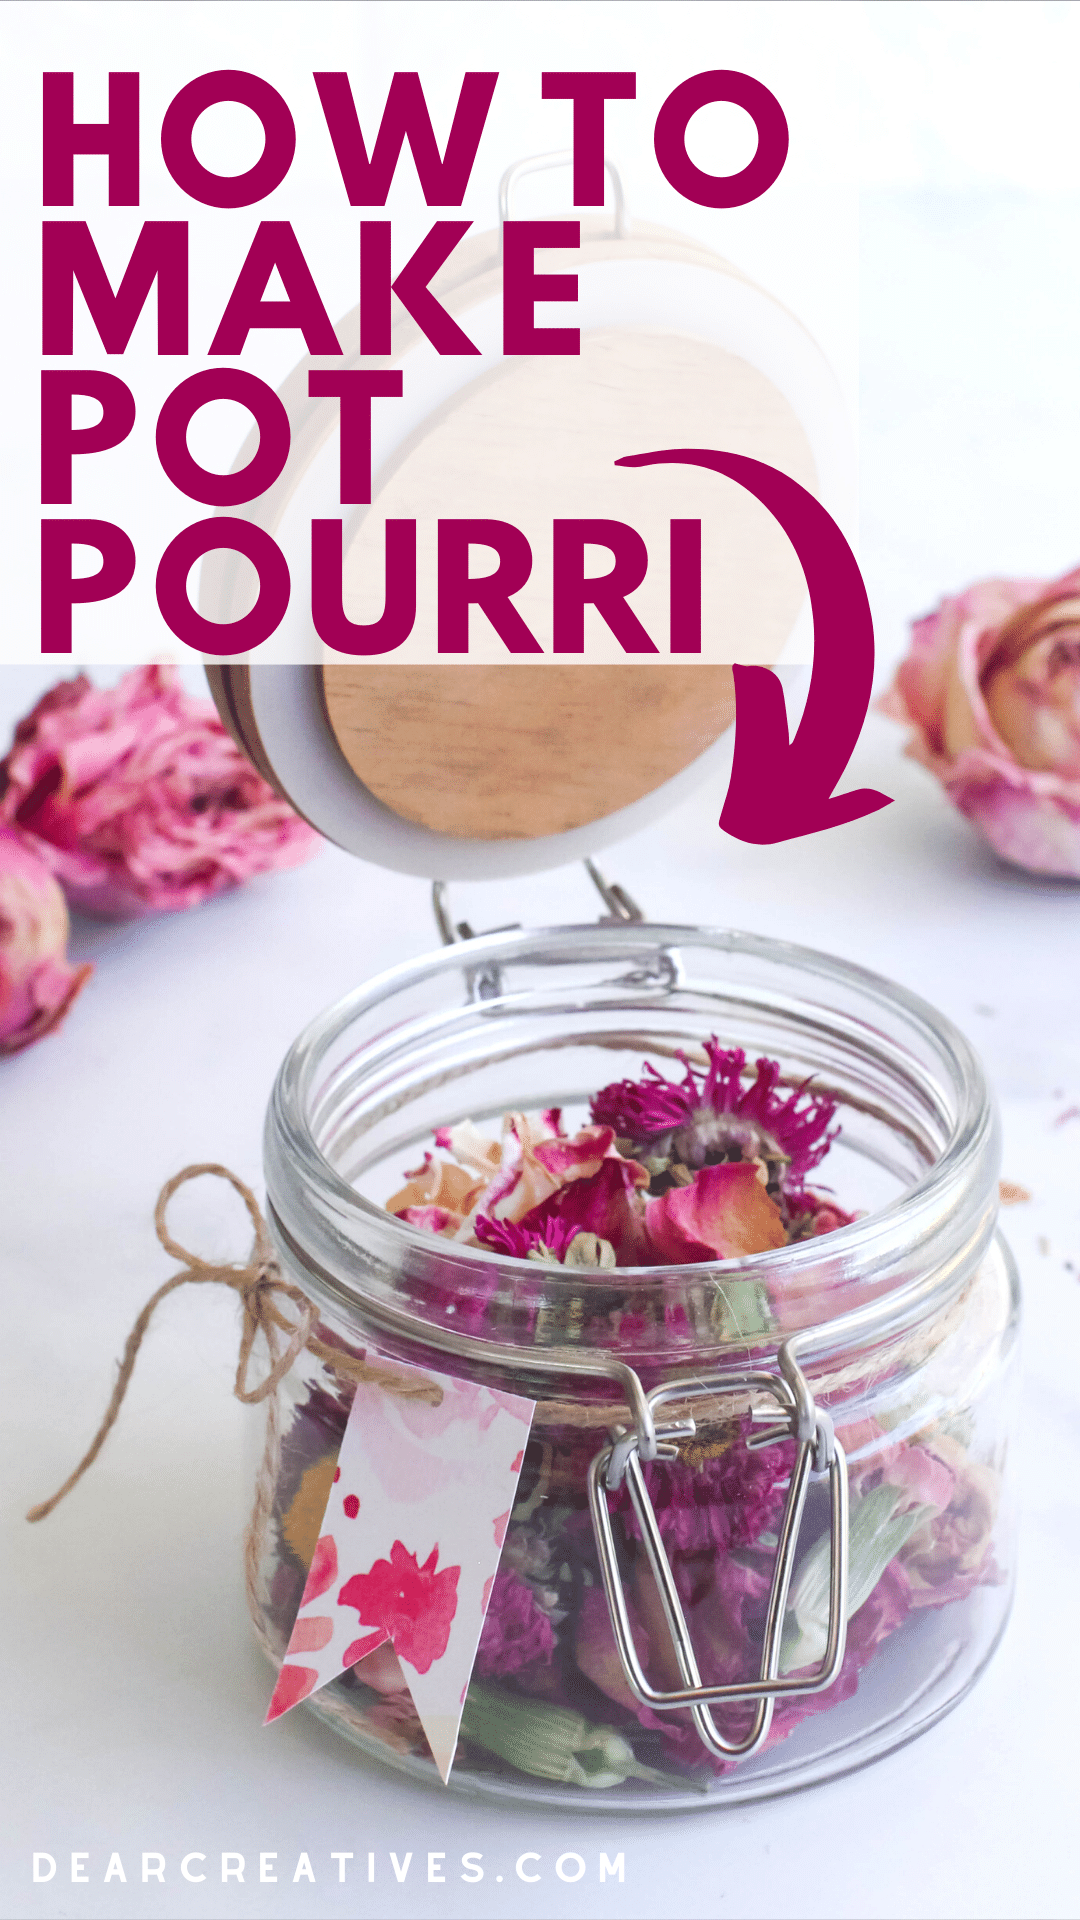 How to make potpourri - DIY Potpourri with step by step instructions. Use potpourri at home or make them for gifts. So many great tips! - DearCreatives.com